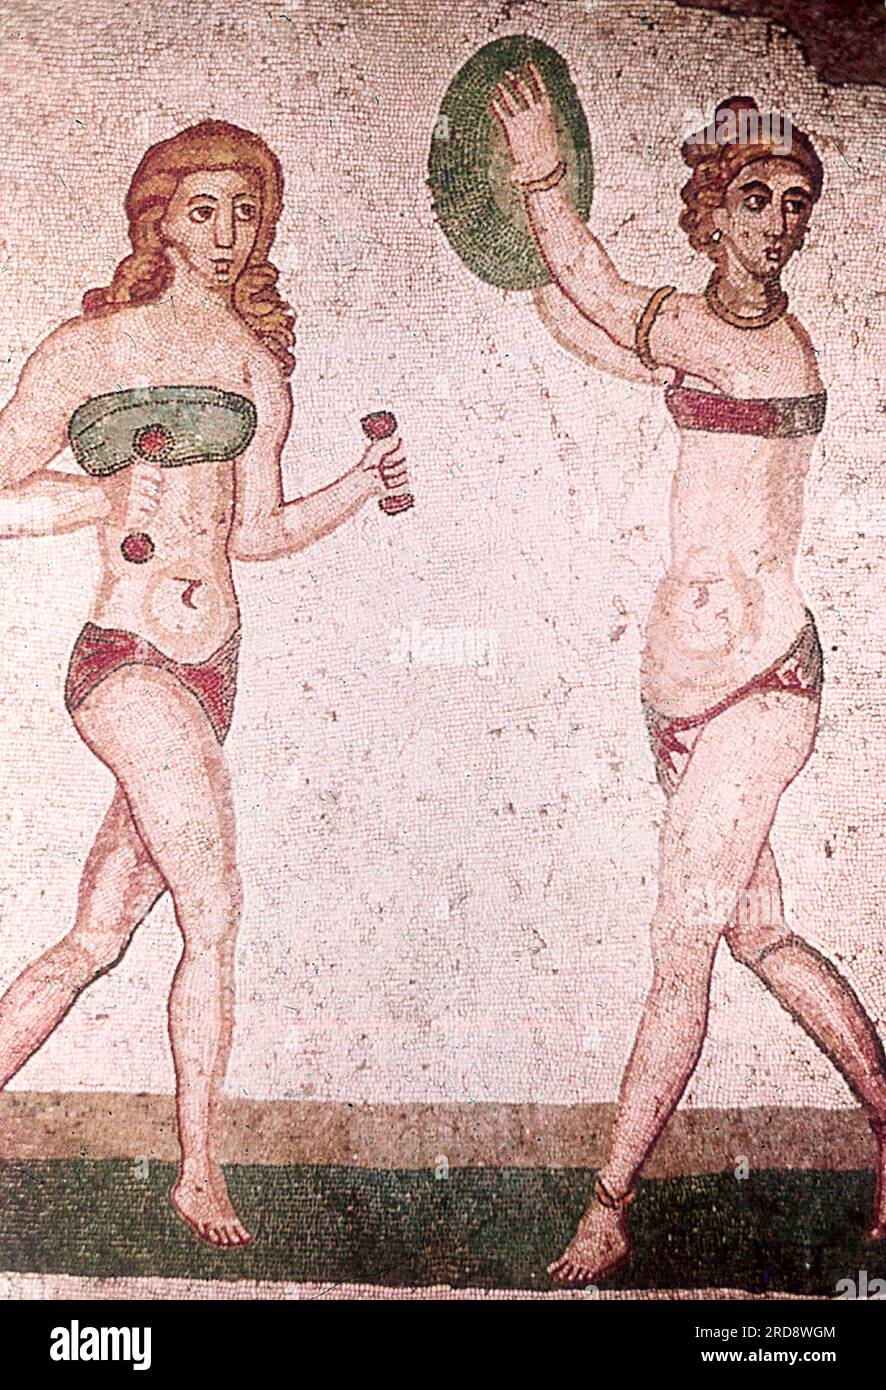 This photo of a mosaic of two girls in what resembles today's bikini was taken in the summer of 1970 at Piazza Armerina in Sicily. This photo of a mosaic of a girl in what resembles today's bikini was taken in the summer of 1970 at Piazza Armerina in Sicily. Piazza Armerina is home to the Roman Villa del Casale and its famous mosaics, the 'finest mosaics in situ anywhere in the Roman world,' as described by UNESCO, which inserted it into its World Heritage list in 1997. Villa Romana was a lavish patrician residence built at the center of a huge latifundium (agricultural estate) at the end of t Stock Photo